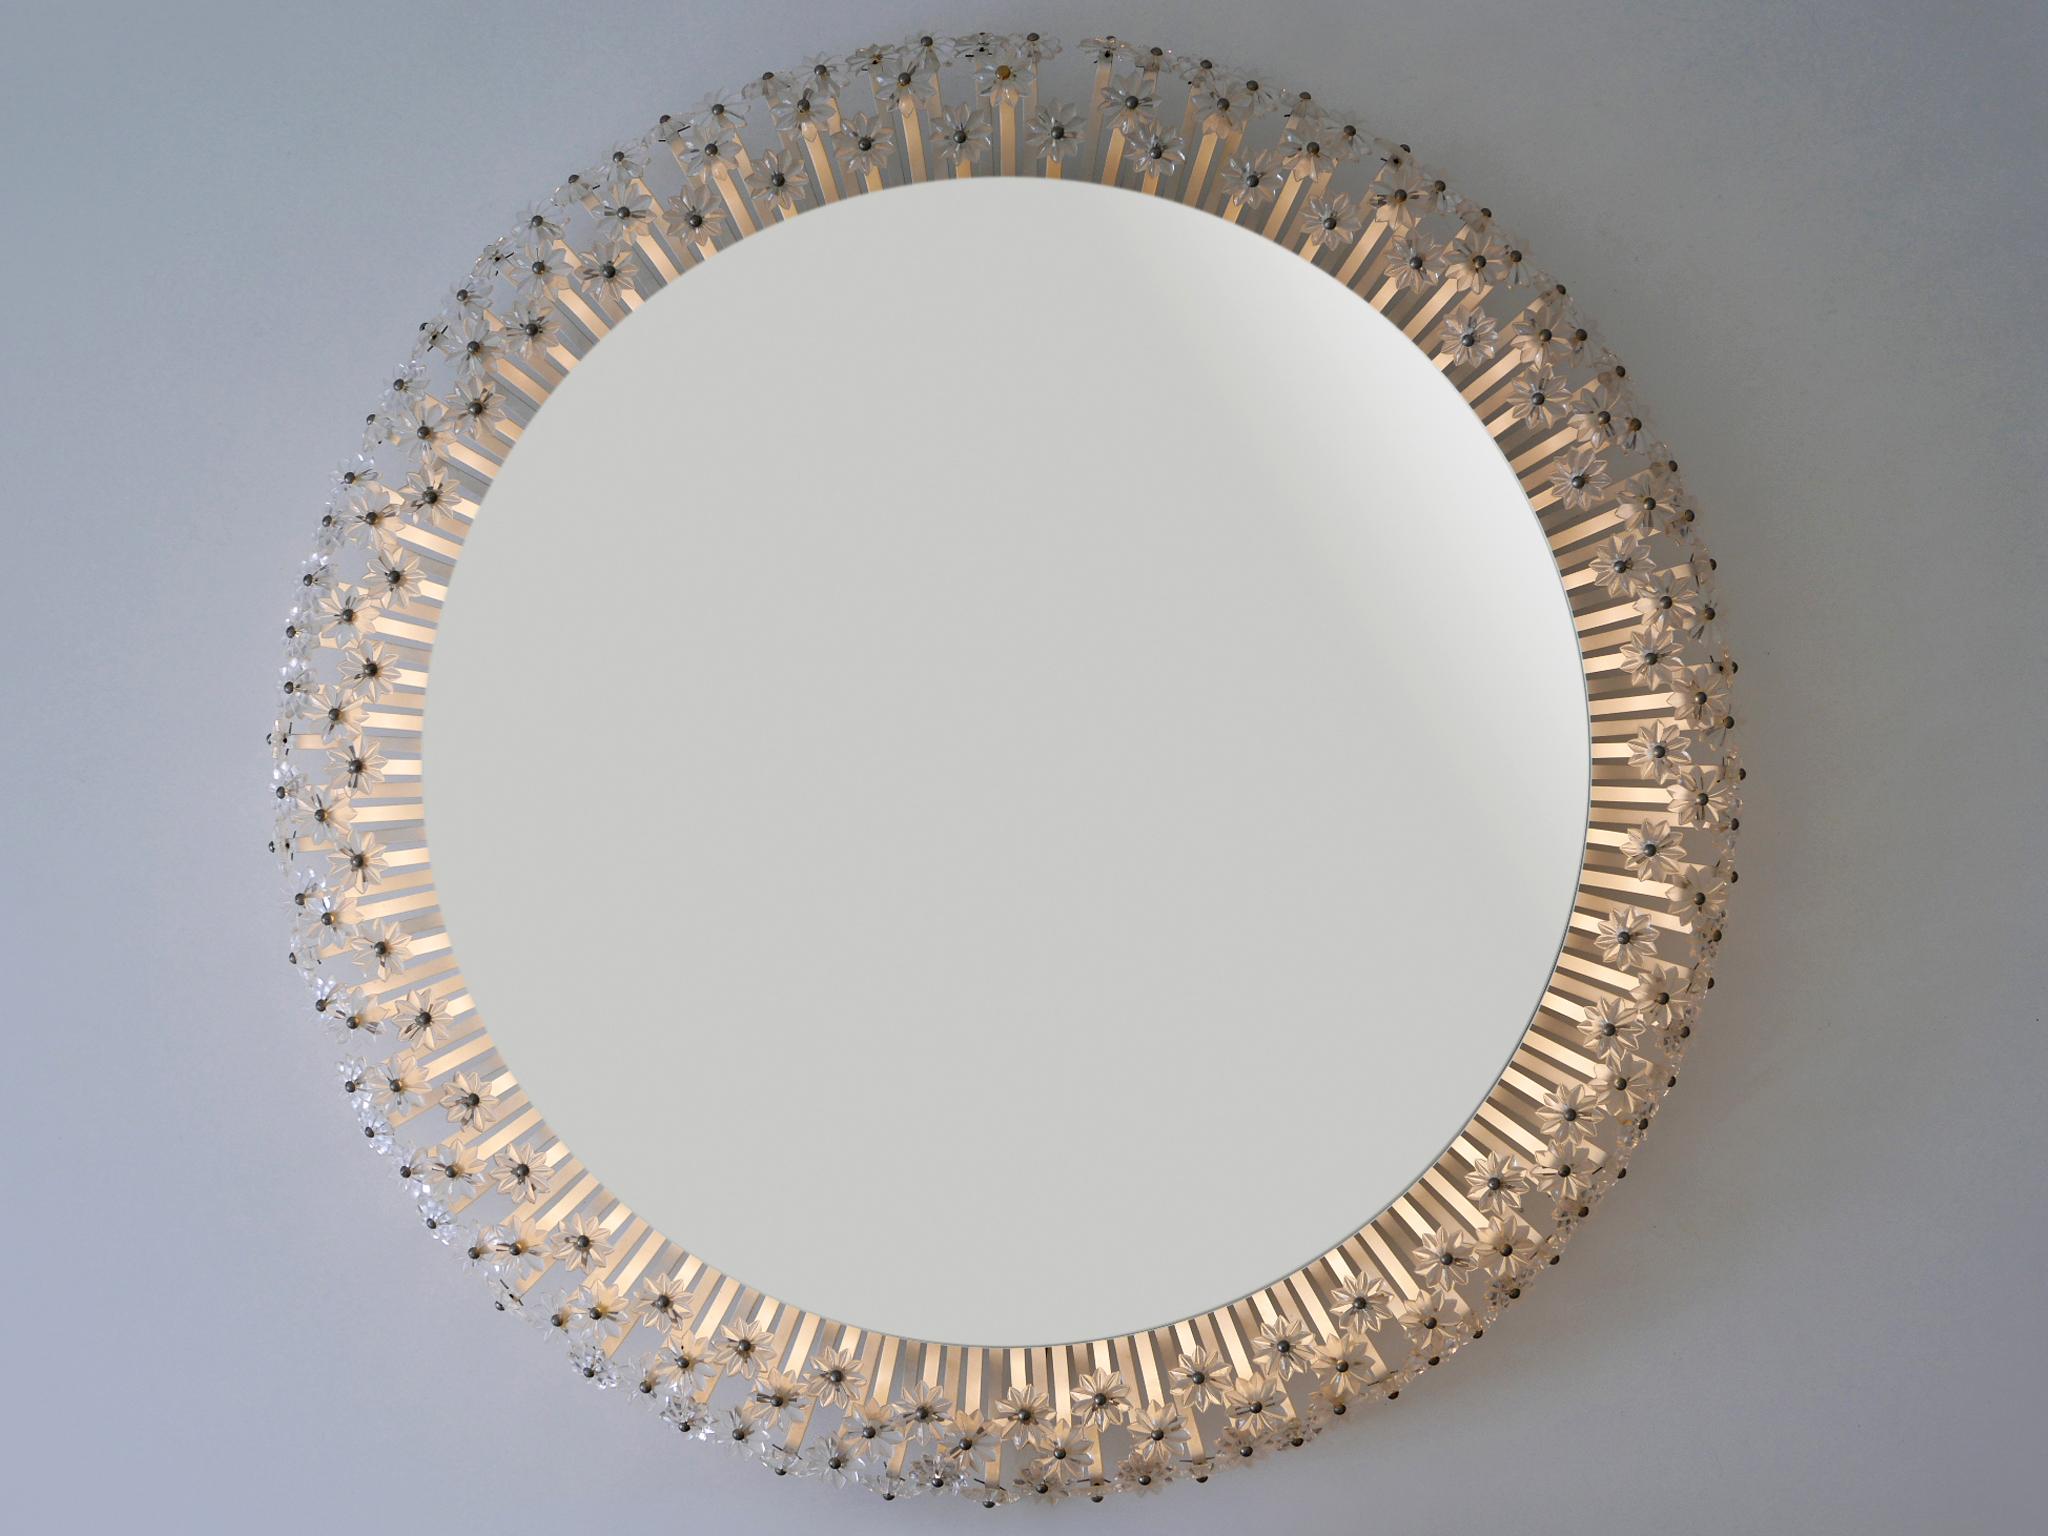 Decorative Mid-Century Modern Backlit Wall Mirror by Schöninger Germany 1960s For Sale 5